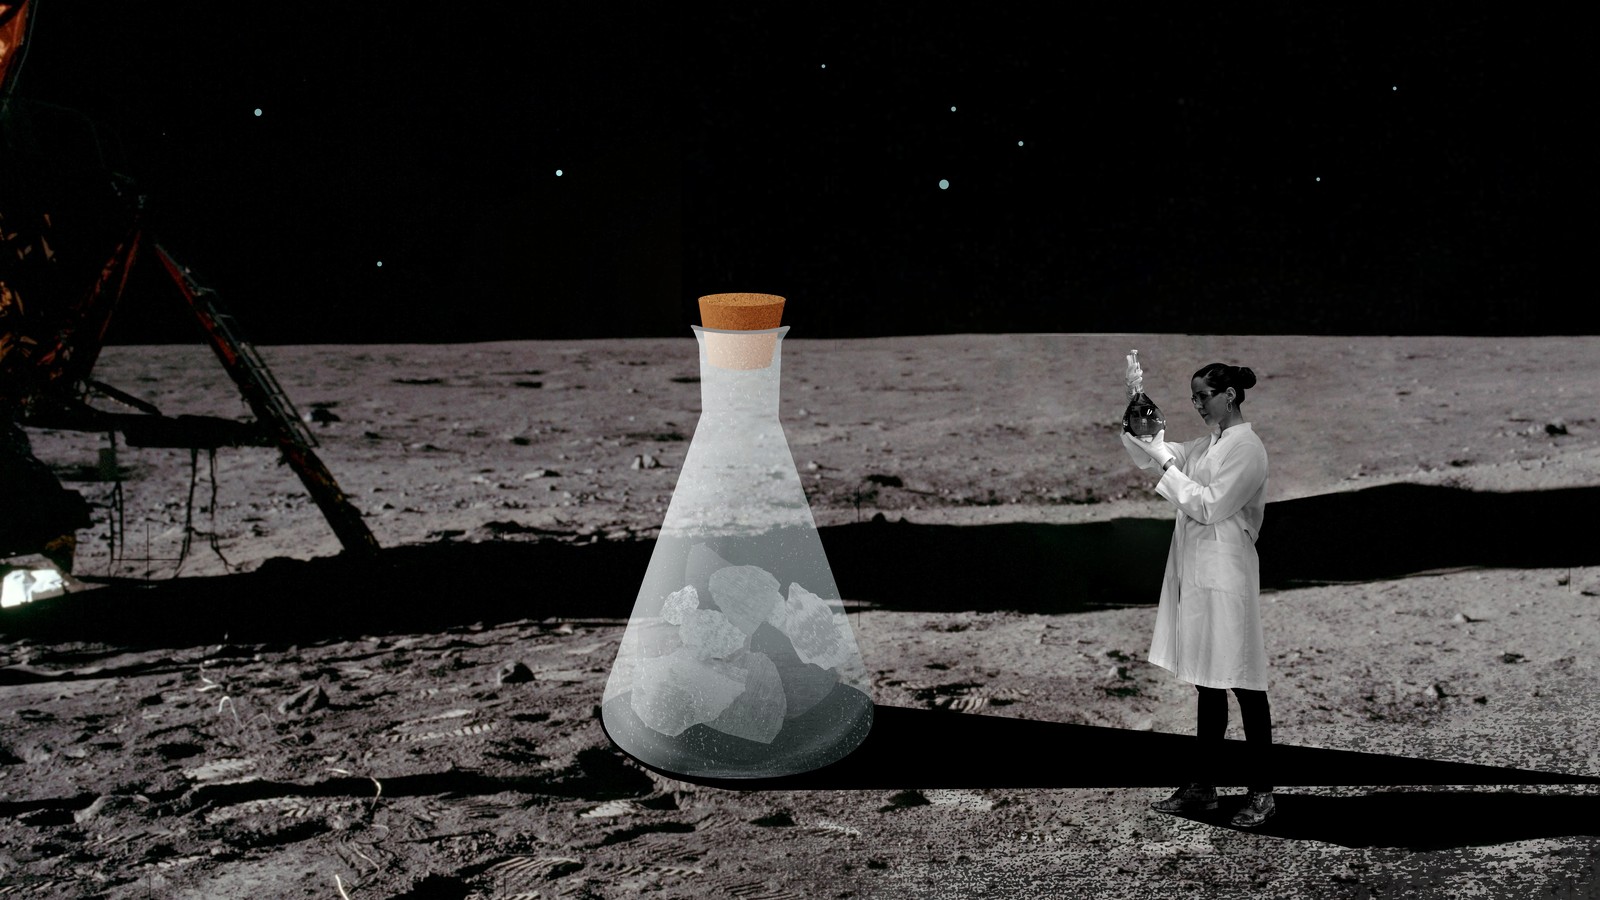 The Mystery of Moon Dust